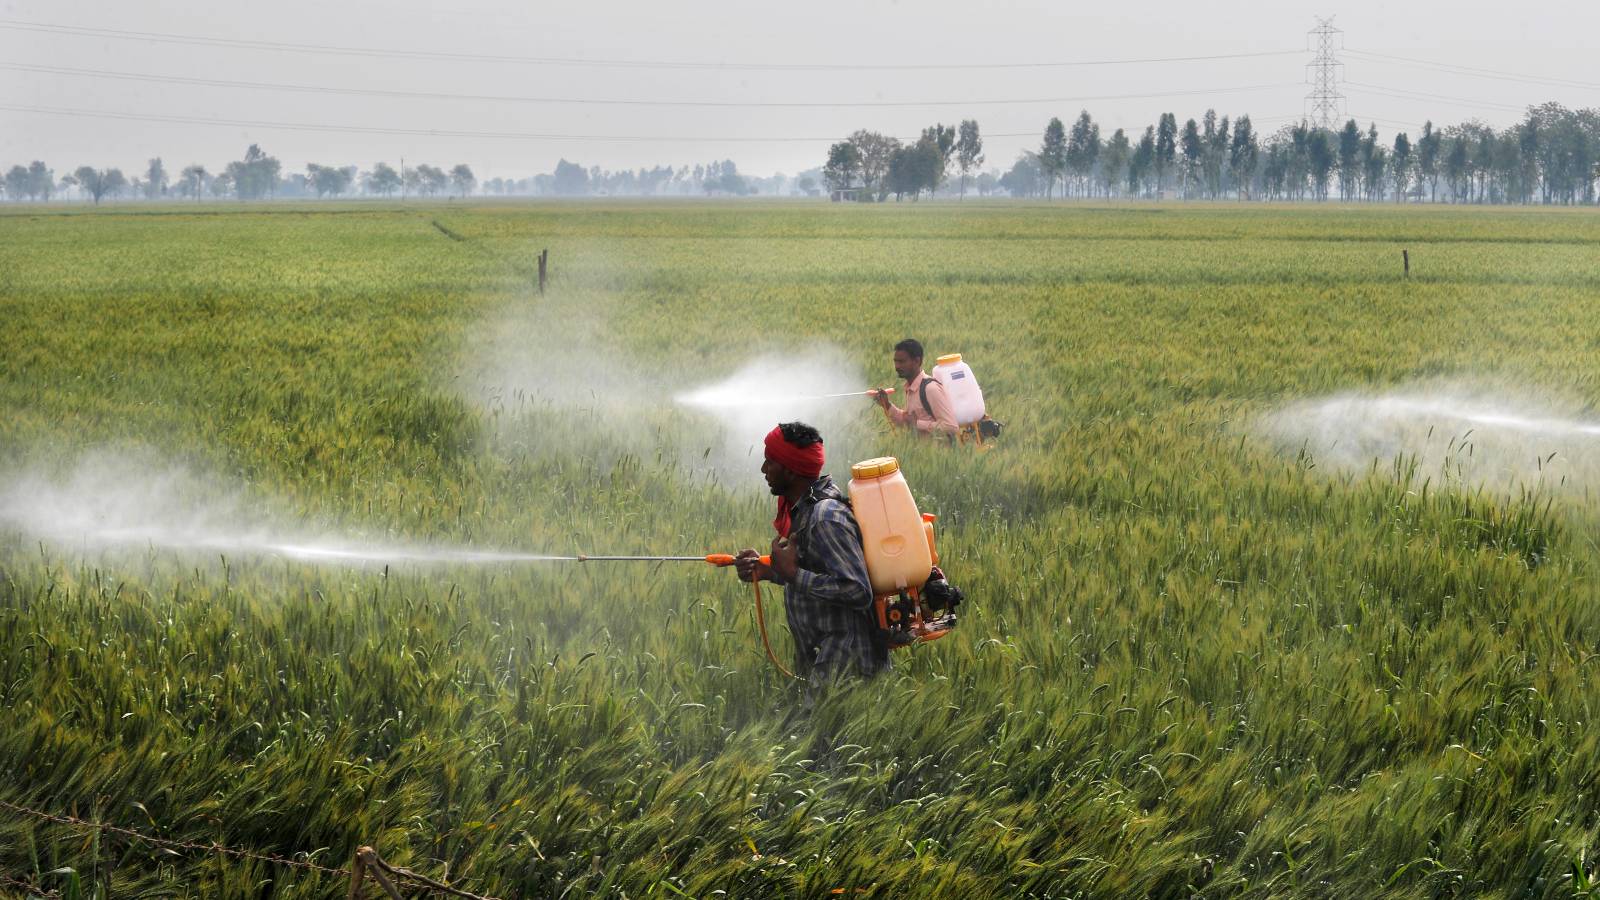 Two people walk through a field of wheat, carrying containers of pesticides on their back and holding hoses to spray pesticides over the green crop. Neither are wearing any protective gear or face masks. A third spray of the chemical material enters in from the right side.